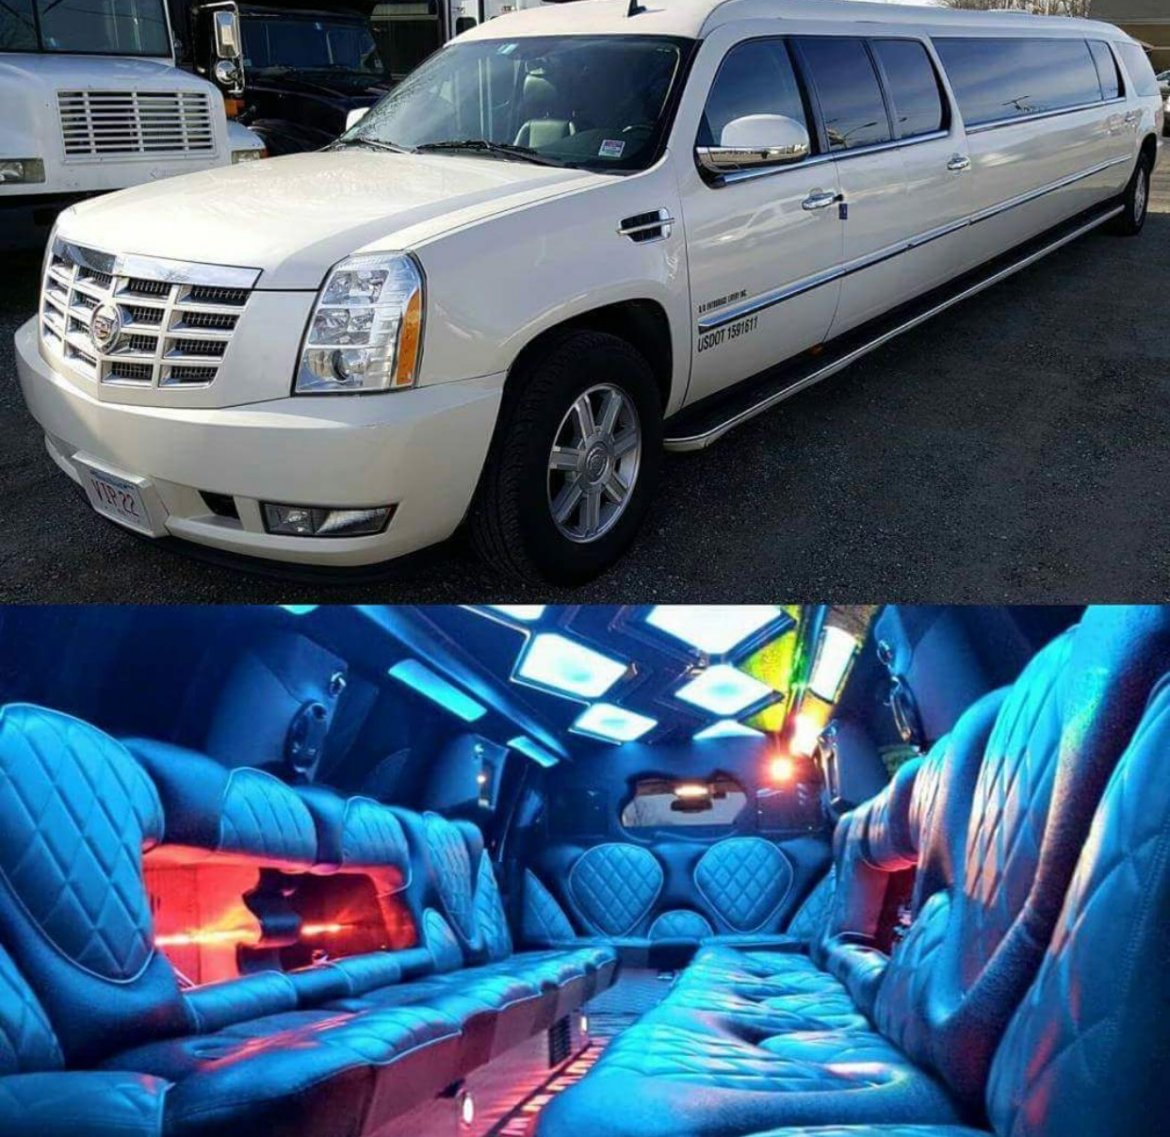 SUV Stretch for sale: 2011 Cadillac Escalade by Moonlight